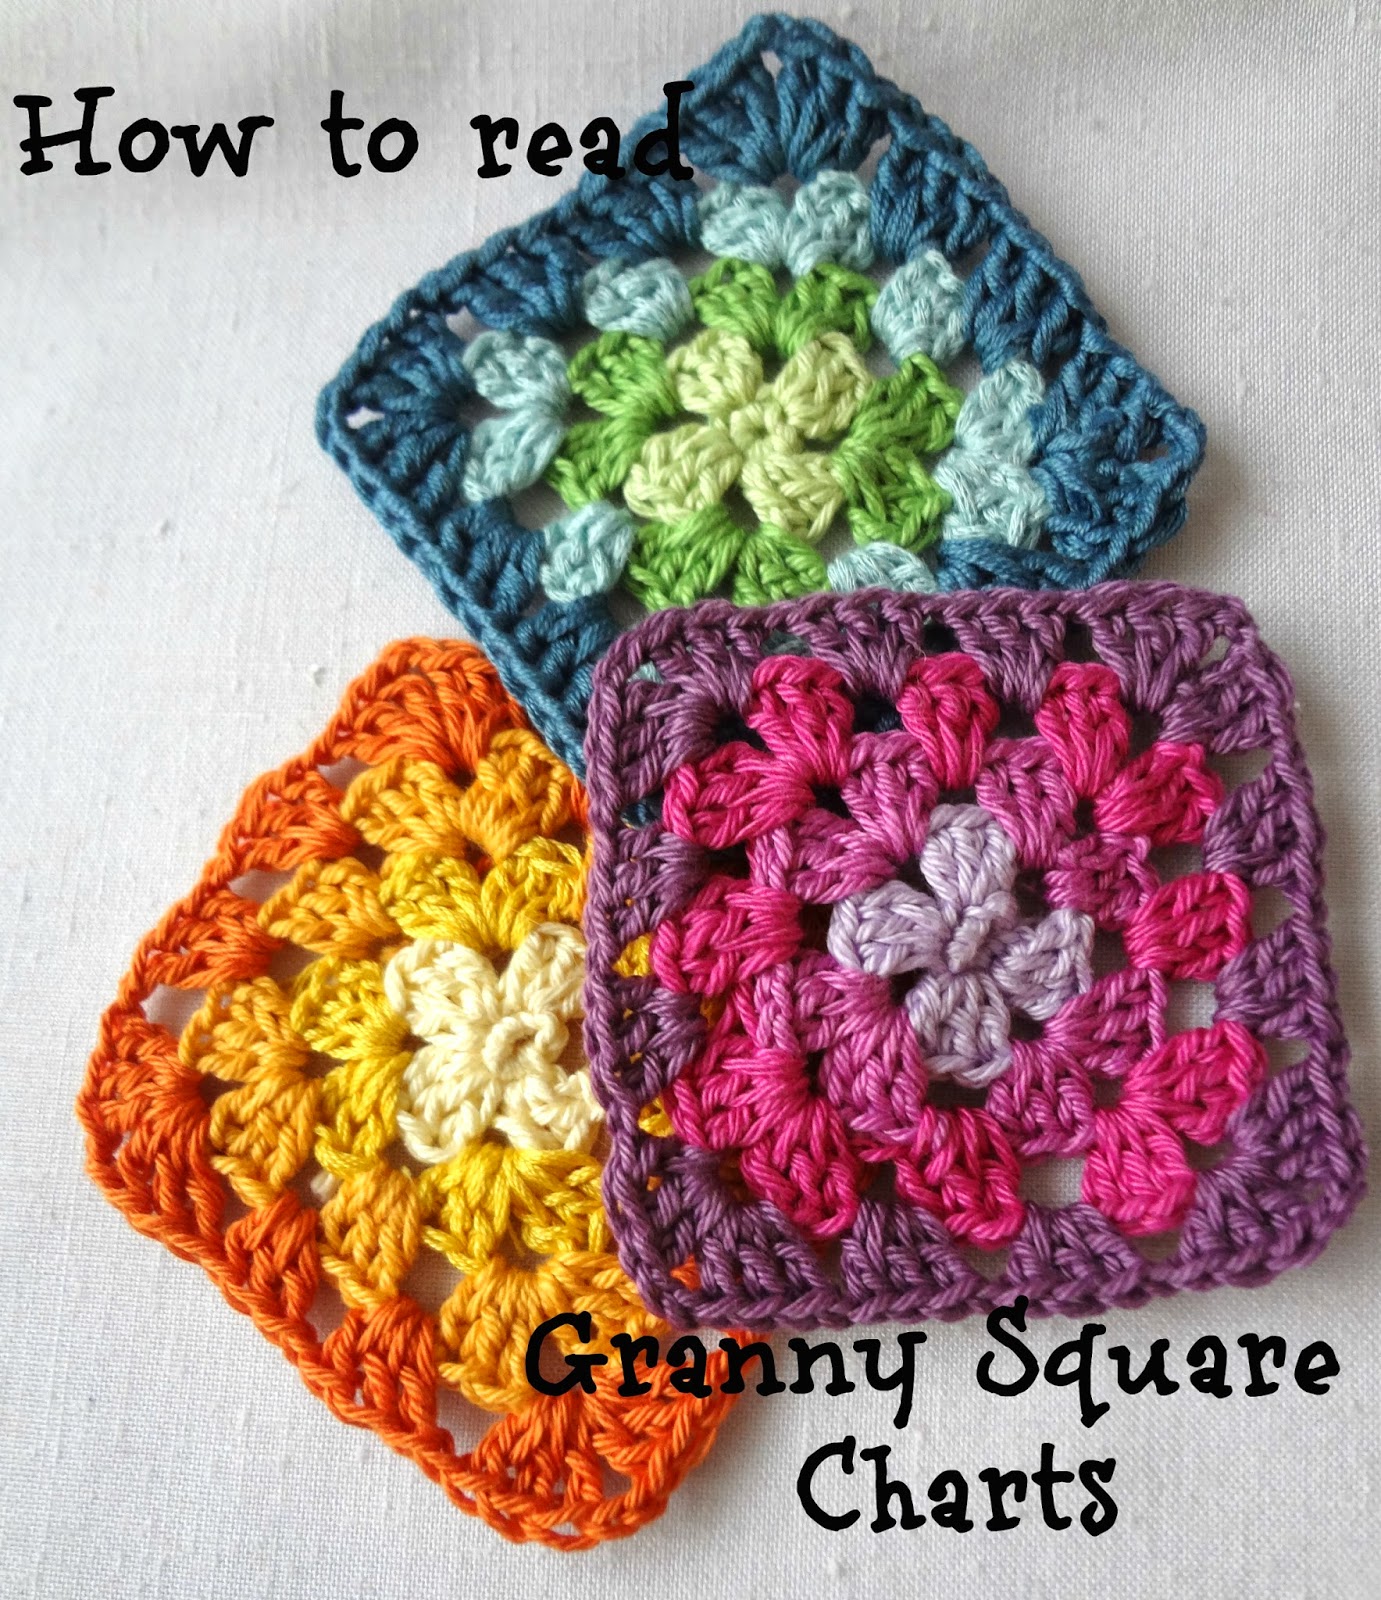 Little Treasures: How to Read Granny Square Charts